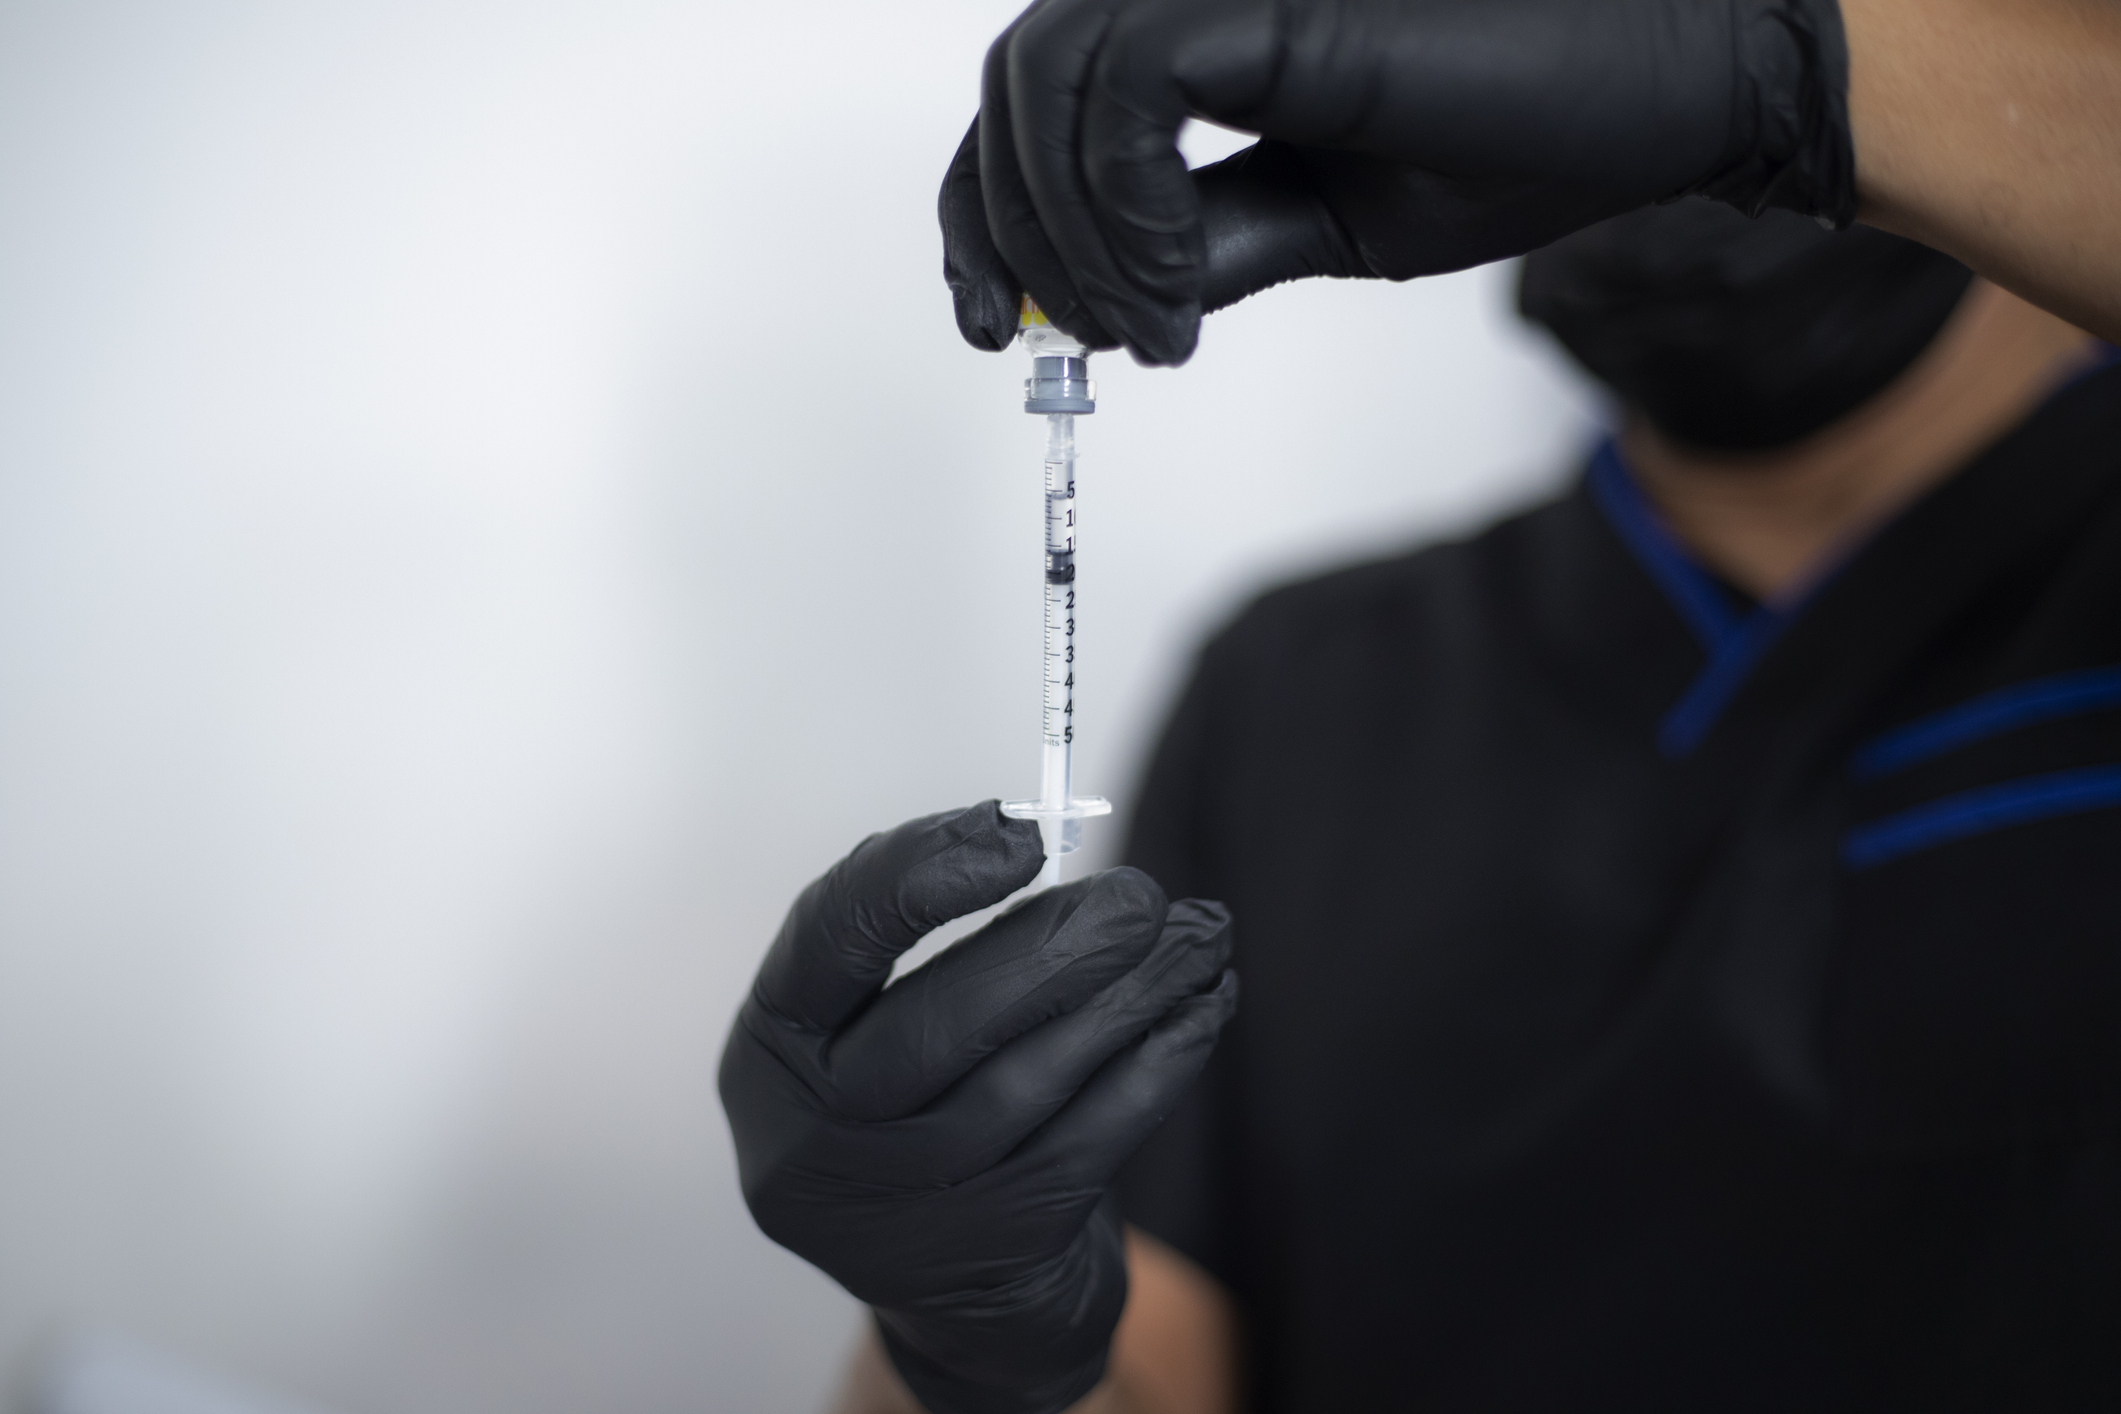 counterfeit botox found in multiple states linked to hospitalizations